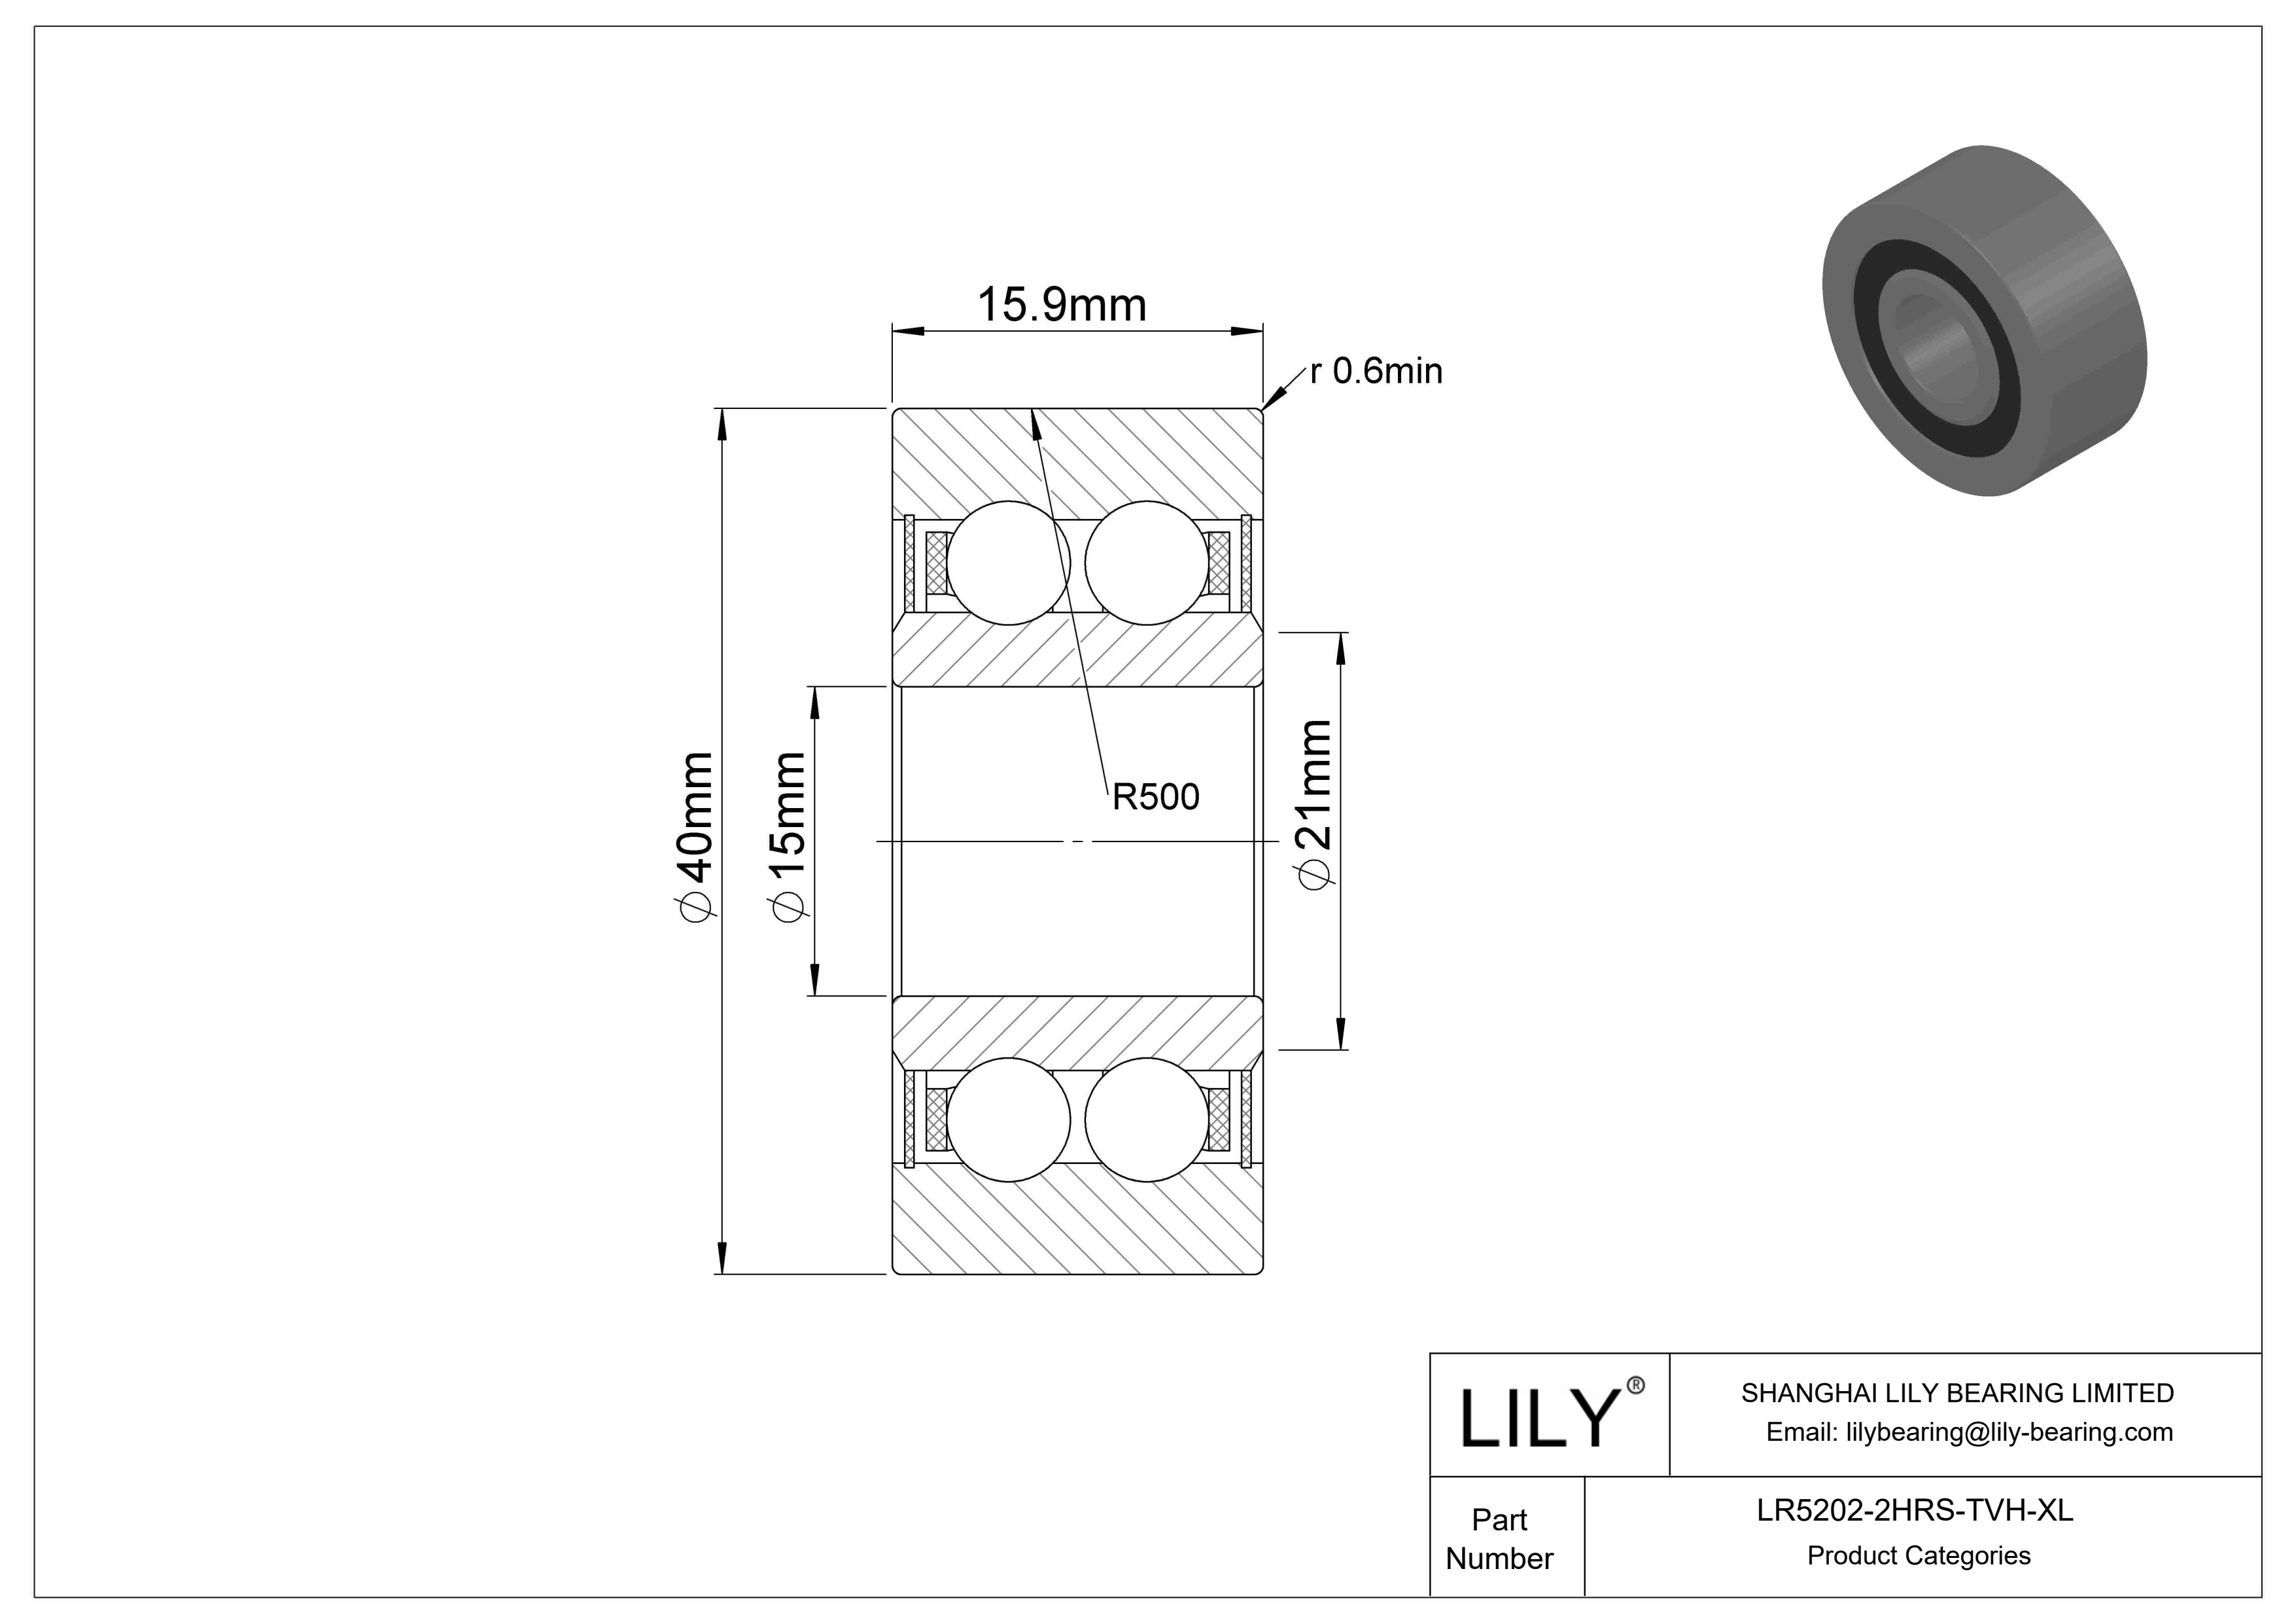 LR5202-2HRS-TVH-XL Yoke Type Track Rollers cad drawing